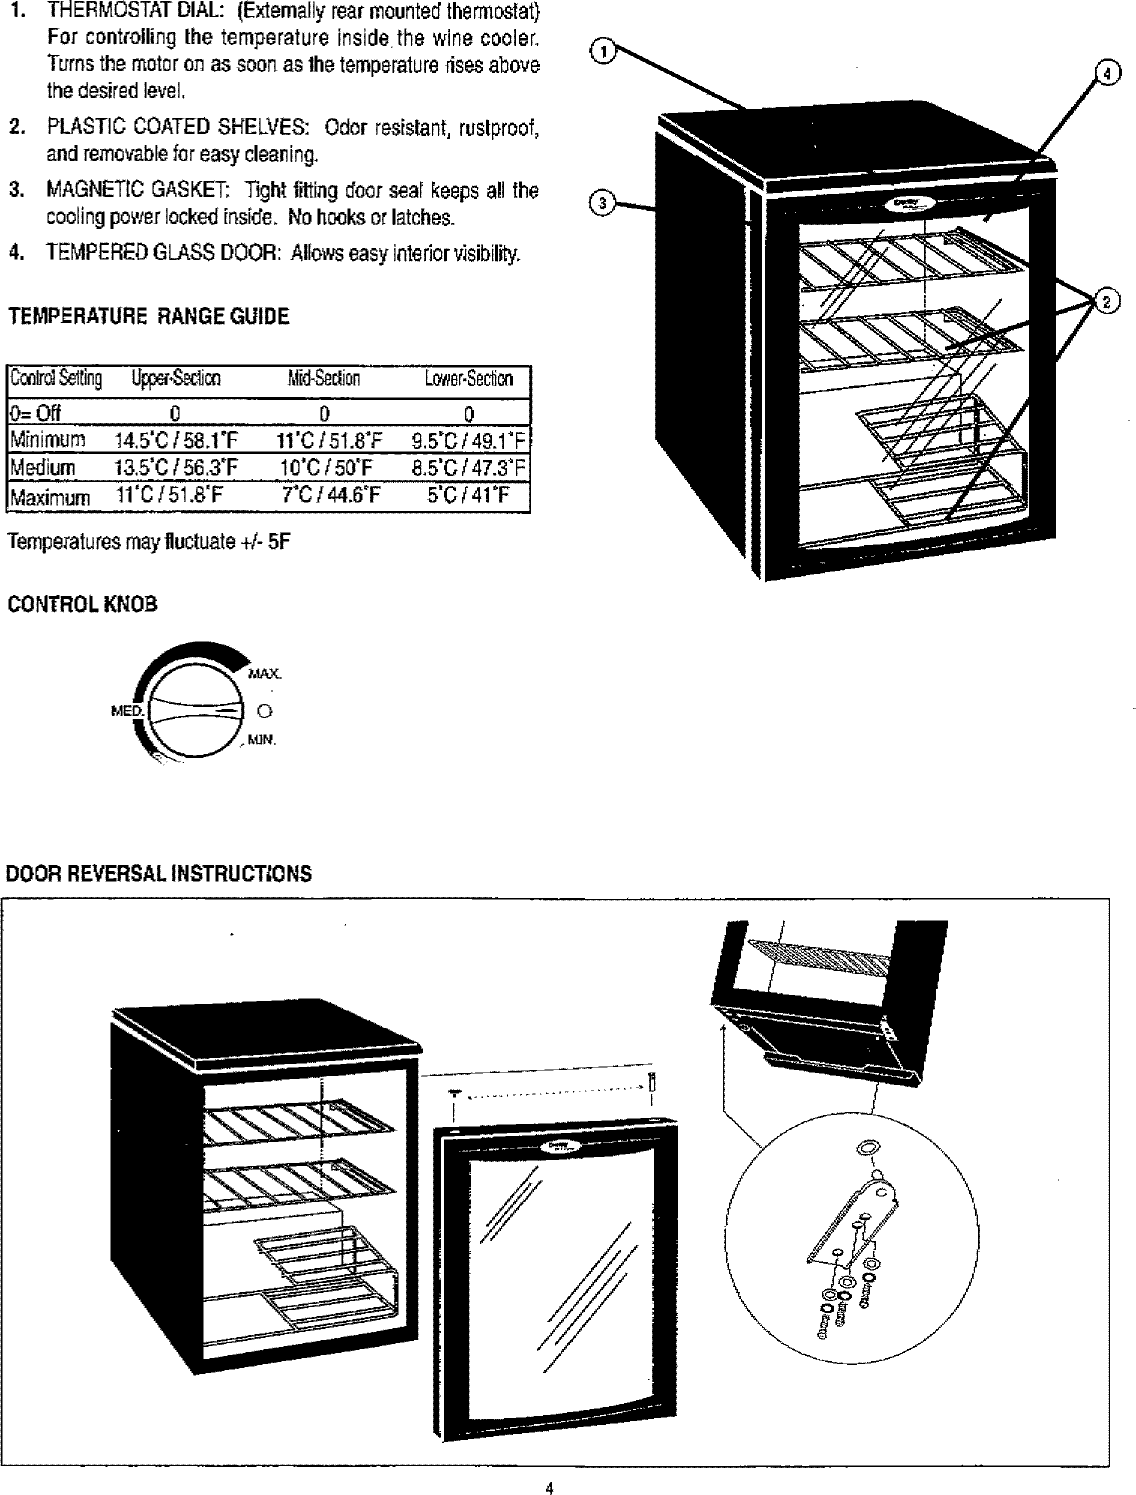 Page 5 of 6 - Danby DWC172BL User Manual  WINE COOLER - Manuals And Guides L0712181